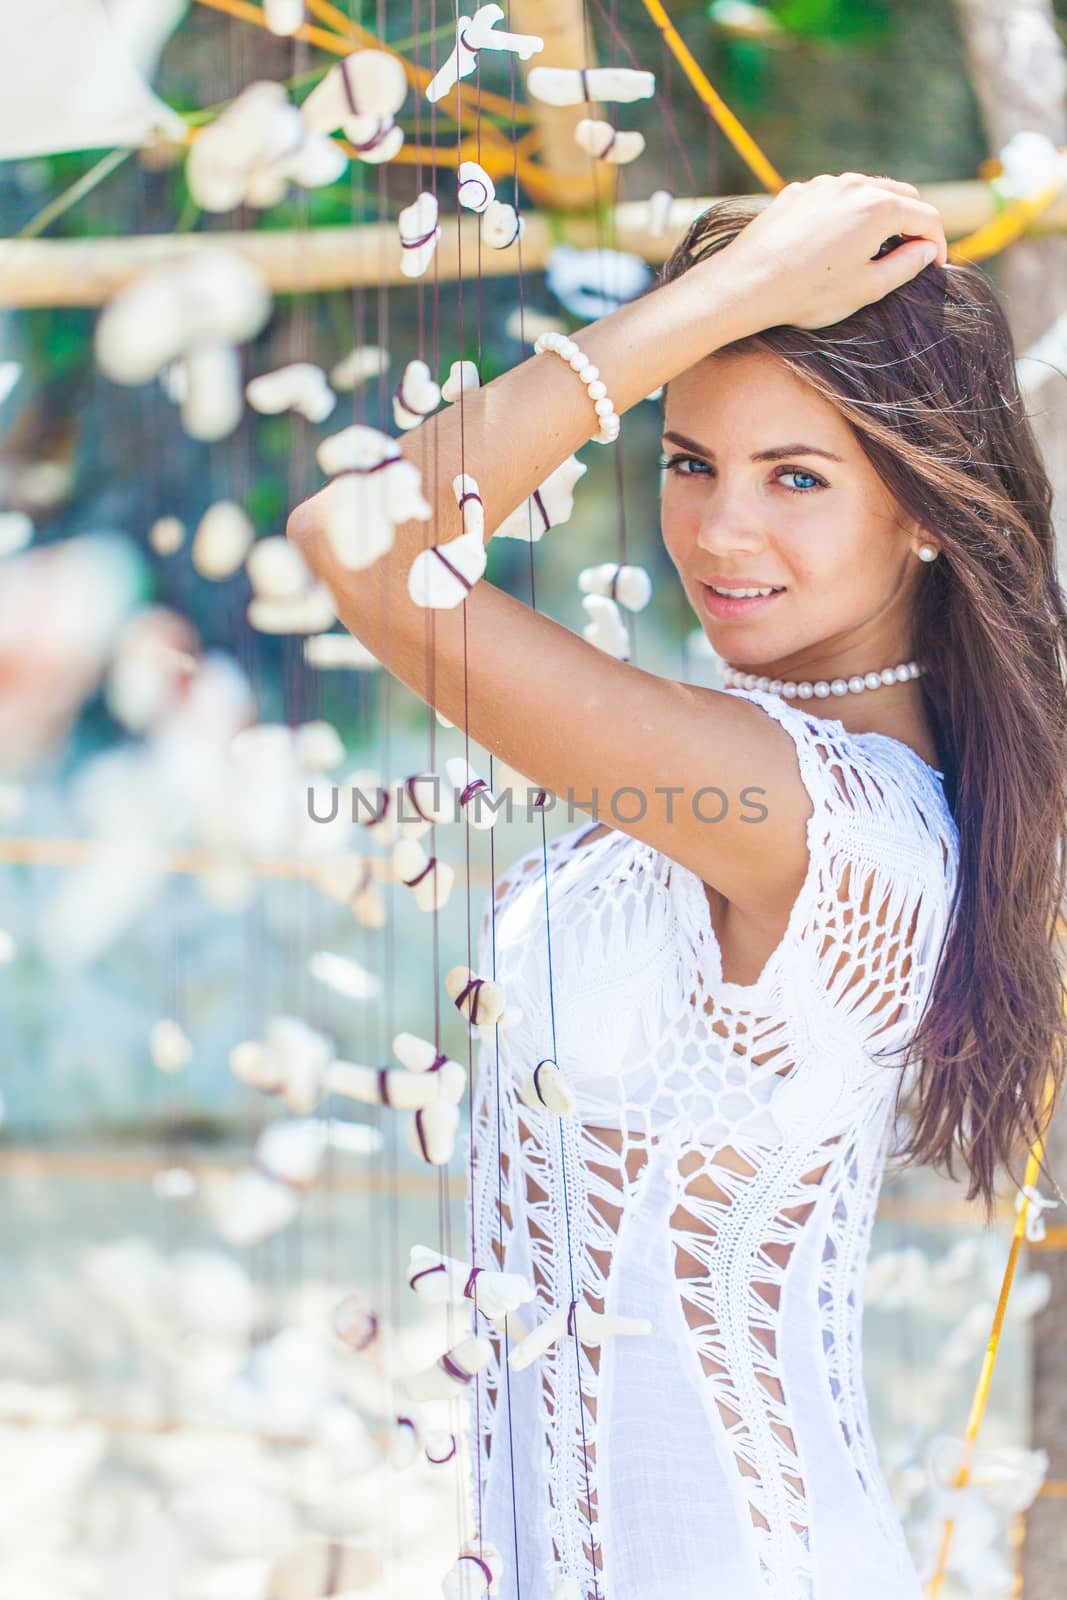 Beautiful woman in white dress on vacation touching a garland of shells and corals